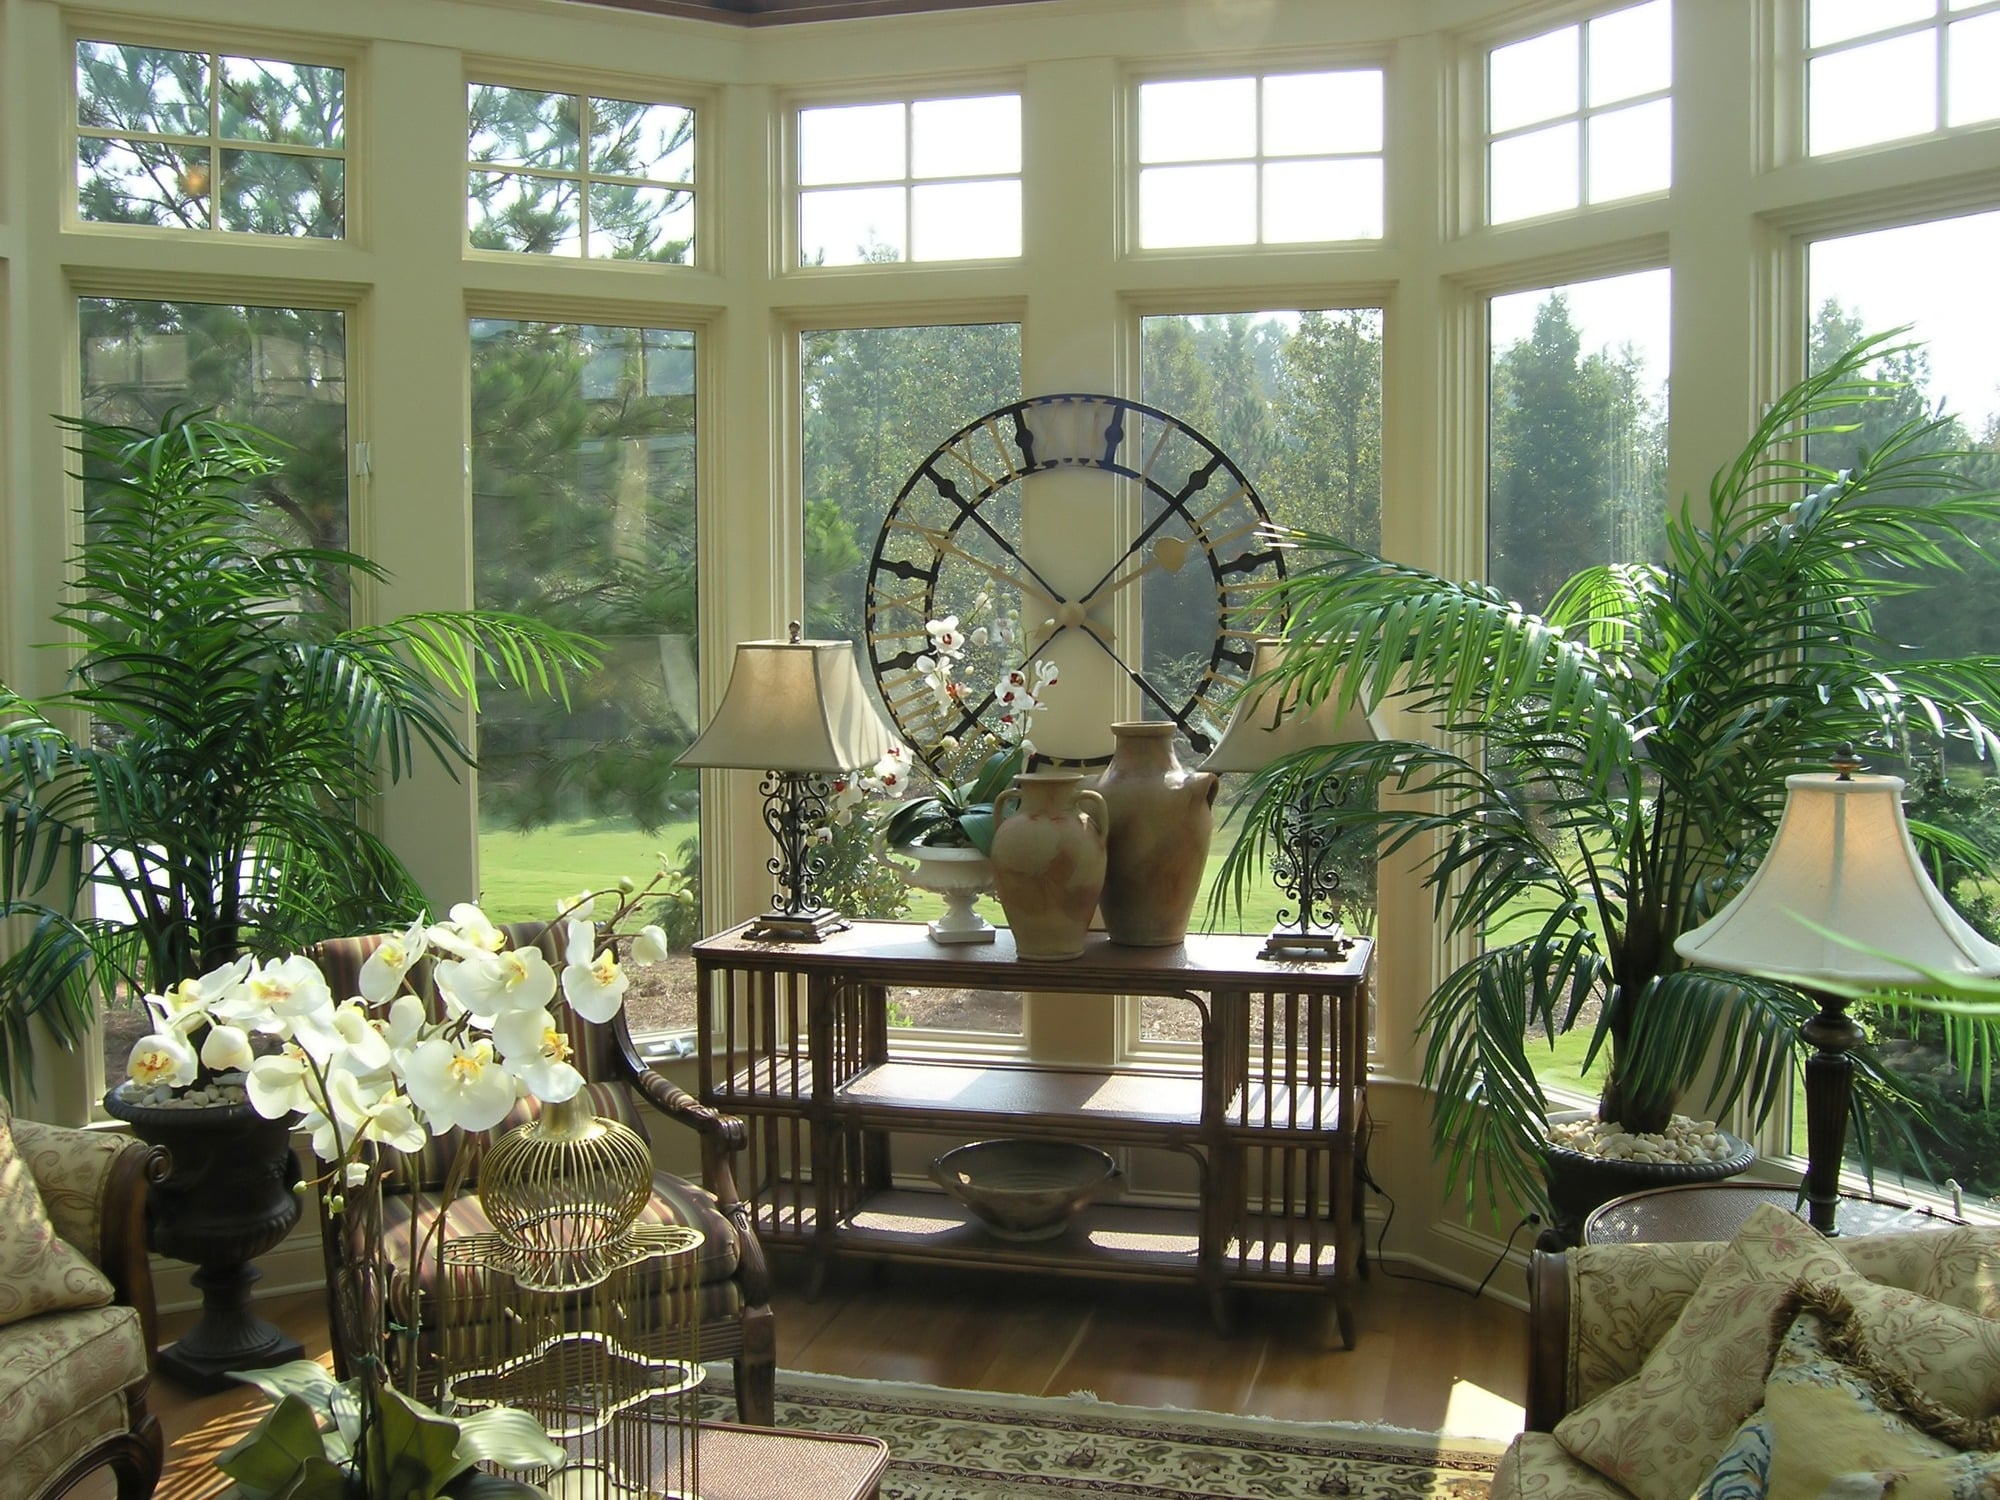 Sunroom adorned with plants